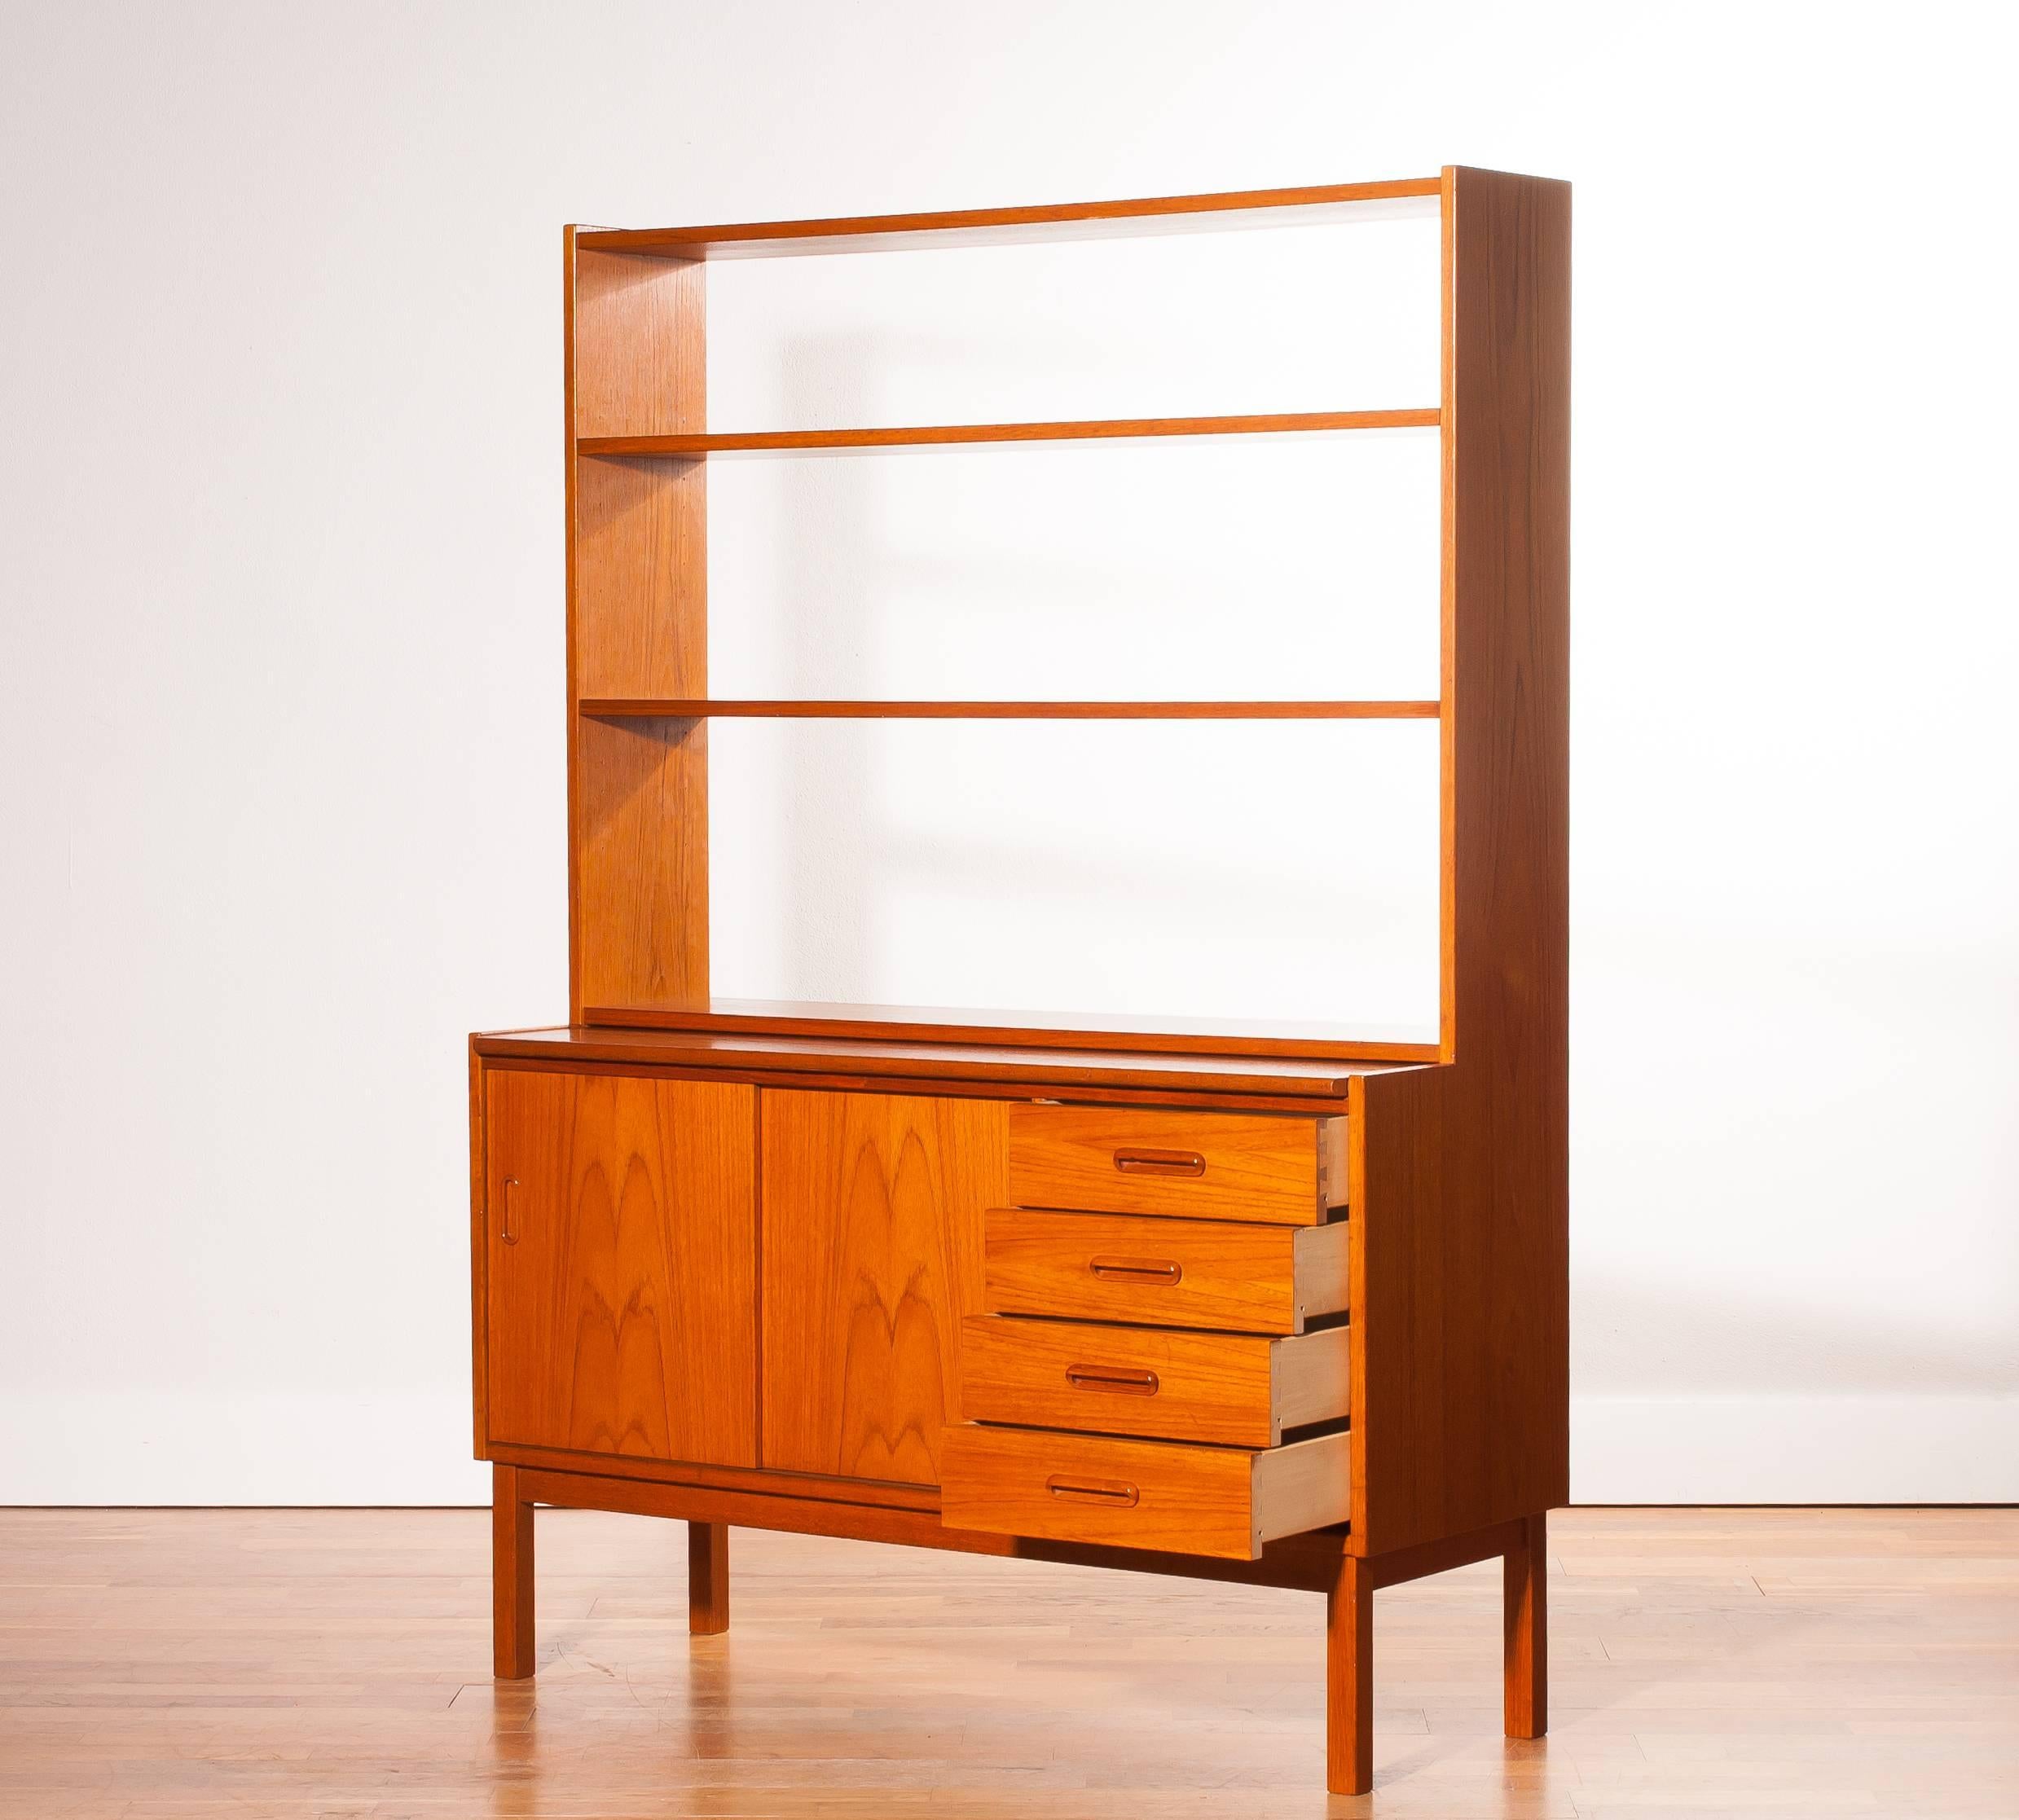 Swedish 1960s, Teak Book Case with Slidable Writing / Working Space from Sweden